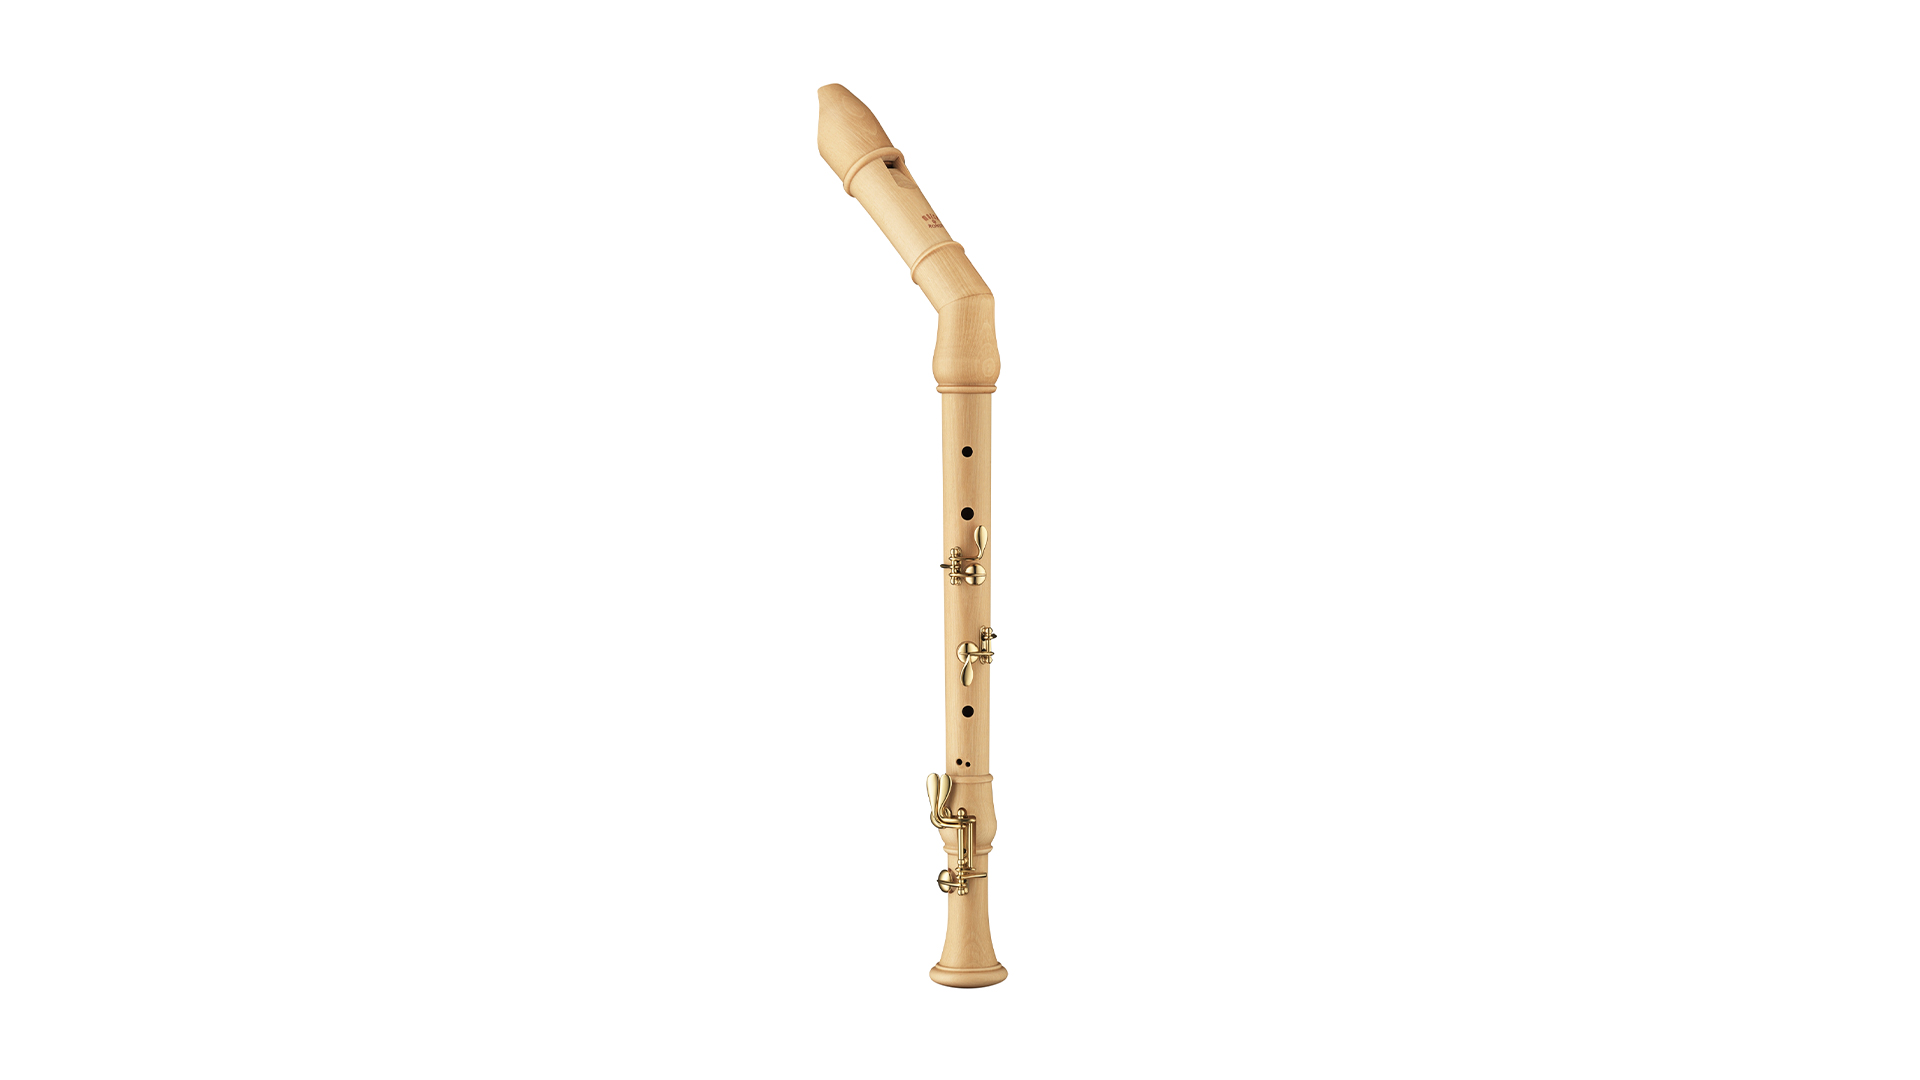 Moeck, "Flauto Rondo", bent tenor plus in c', baroque double hole, with double key and center keys,